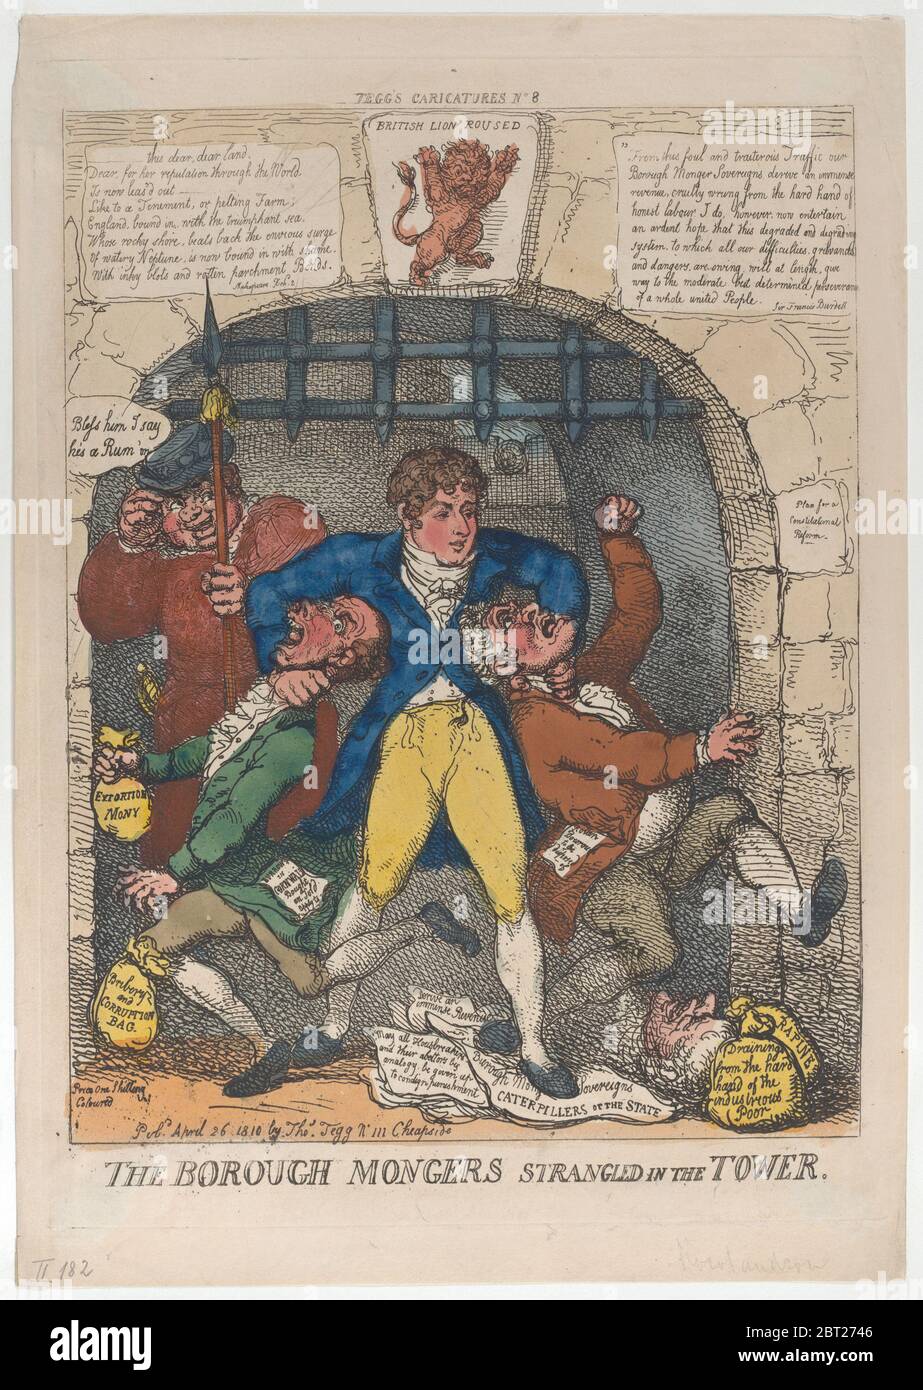 The Borough Mongers Strangled in the Tower, April 26, 1810. Stock Photo